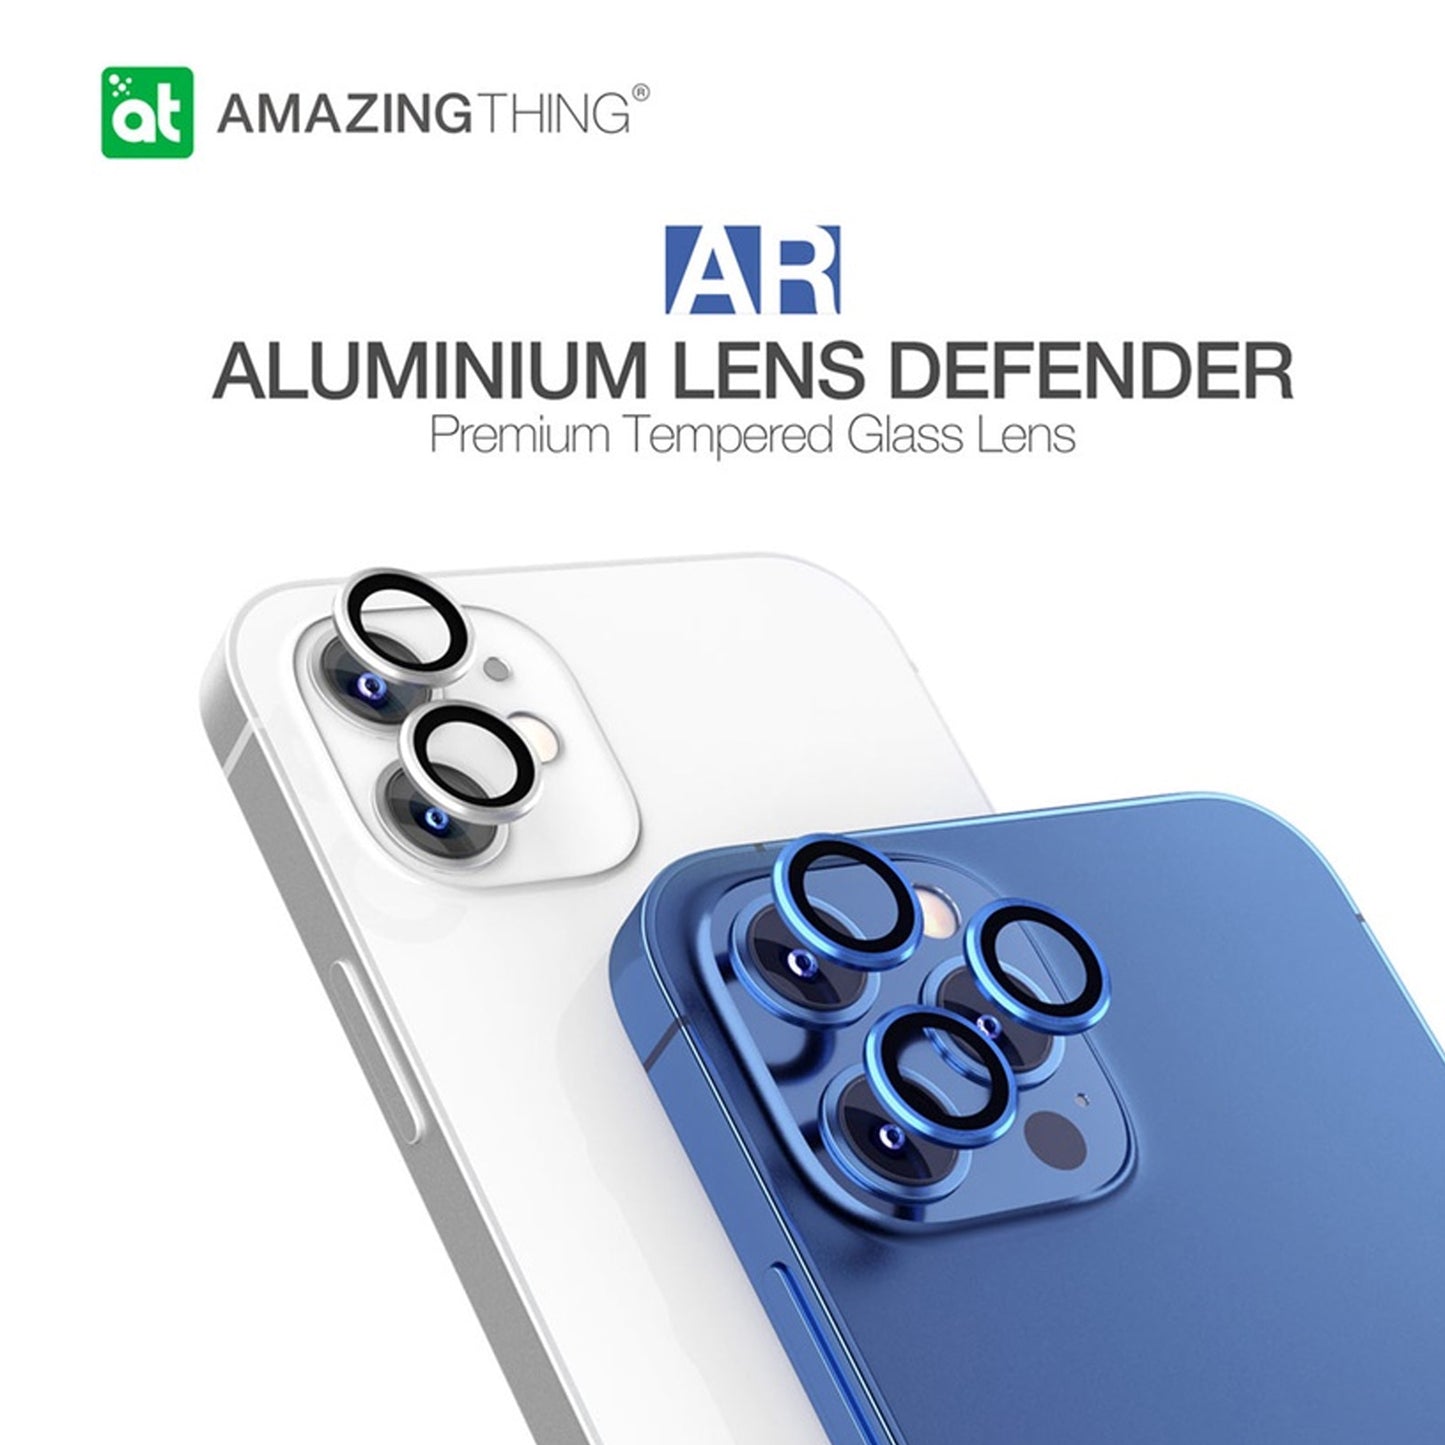 AMAZINGthing SUPREME AR 3D LensGlass Protector for iPhone 13 Pro 6.1" 5G ( Three Lens ) - Gold (Barcode: 4892878069519 )